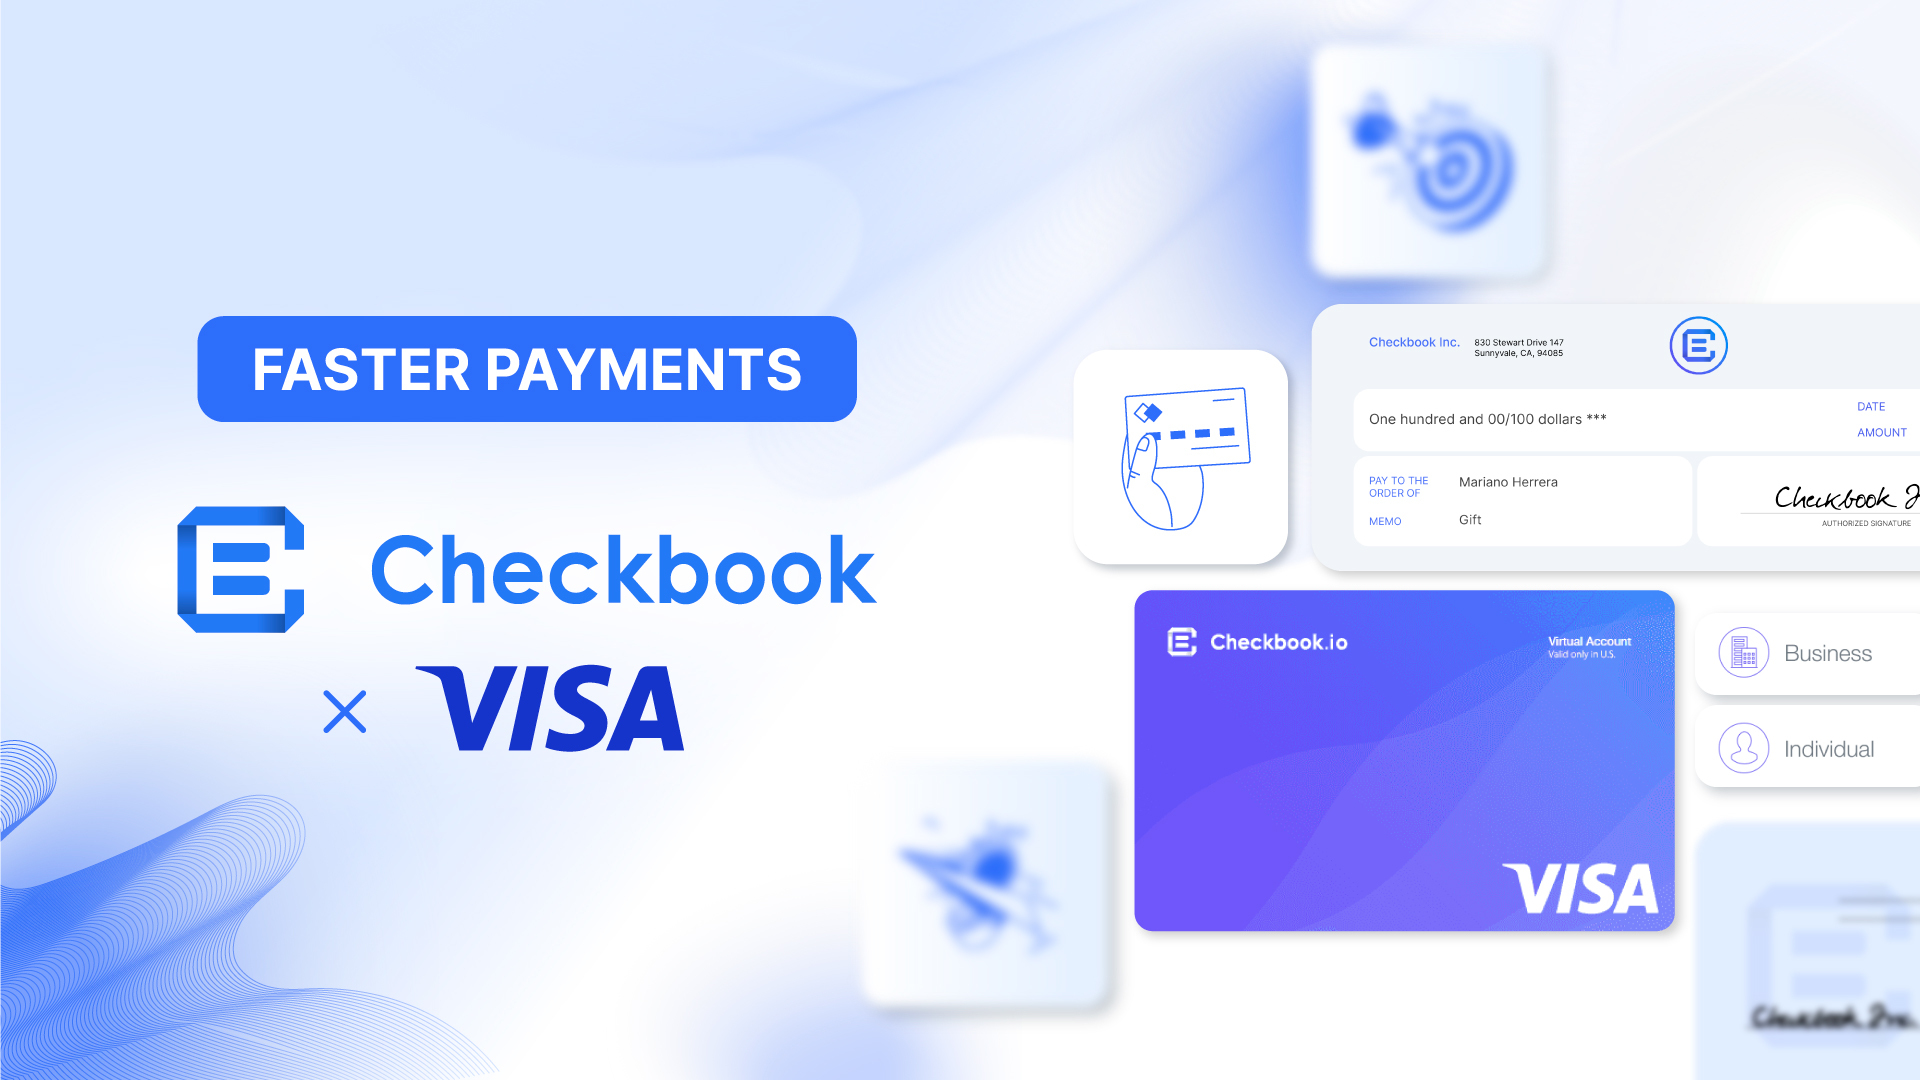 Checkbook and Visa Collaborate to Maximize Instant Payment Availability